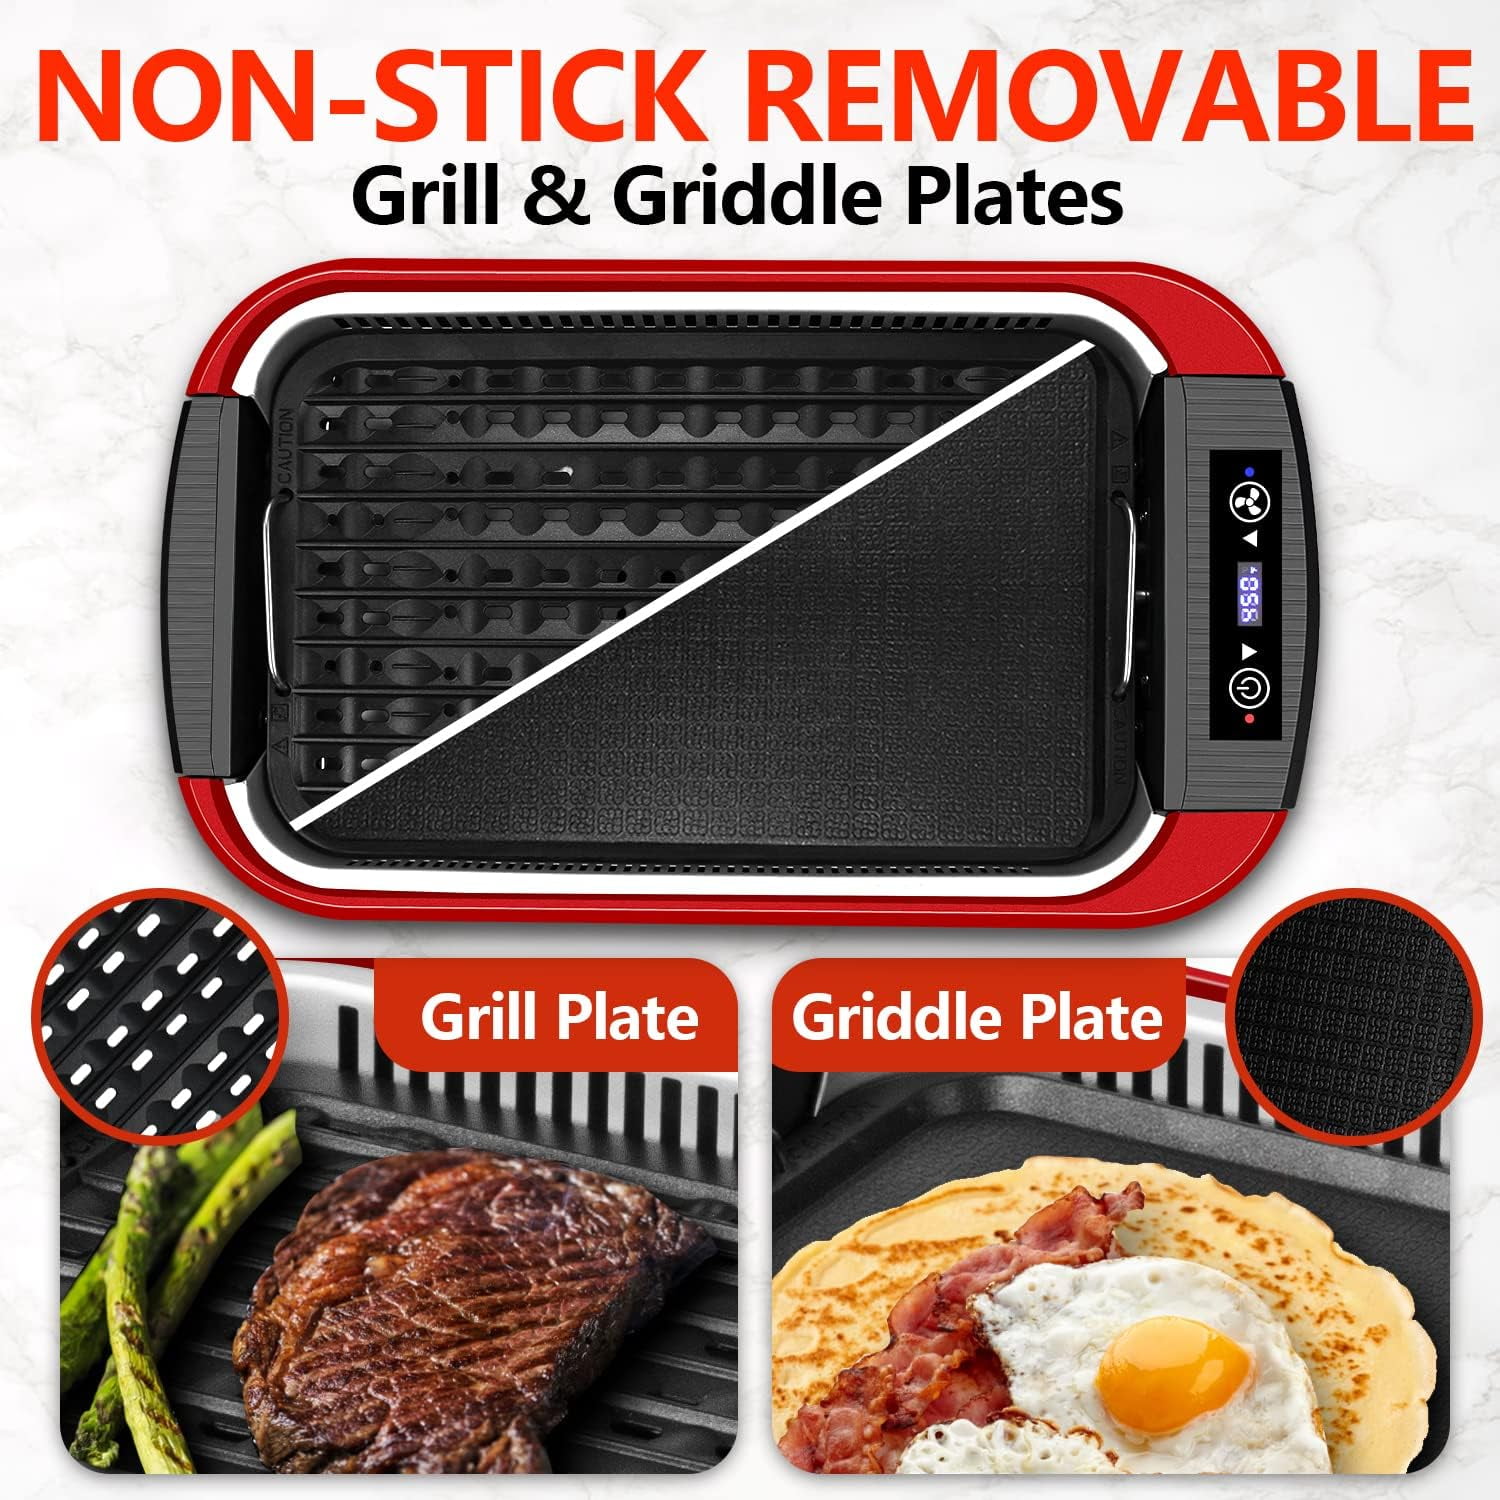 Cusimax Smokeless Indoor Electric Korean BBQ Grill with Glass Lid,1500W Electric  Grill Griddle,Non-stick Removable Grill Plate & Griddle Plate,Adjustable  Temperature,Dishwasher Safe,Stainless Steel